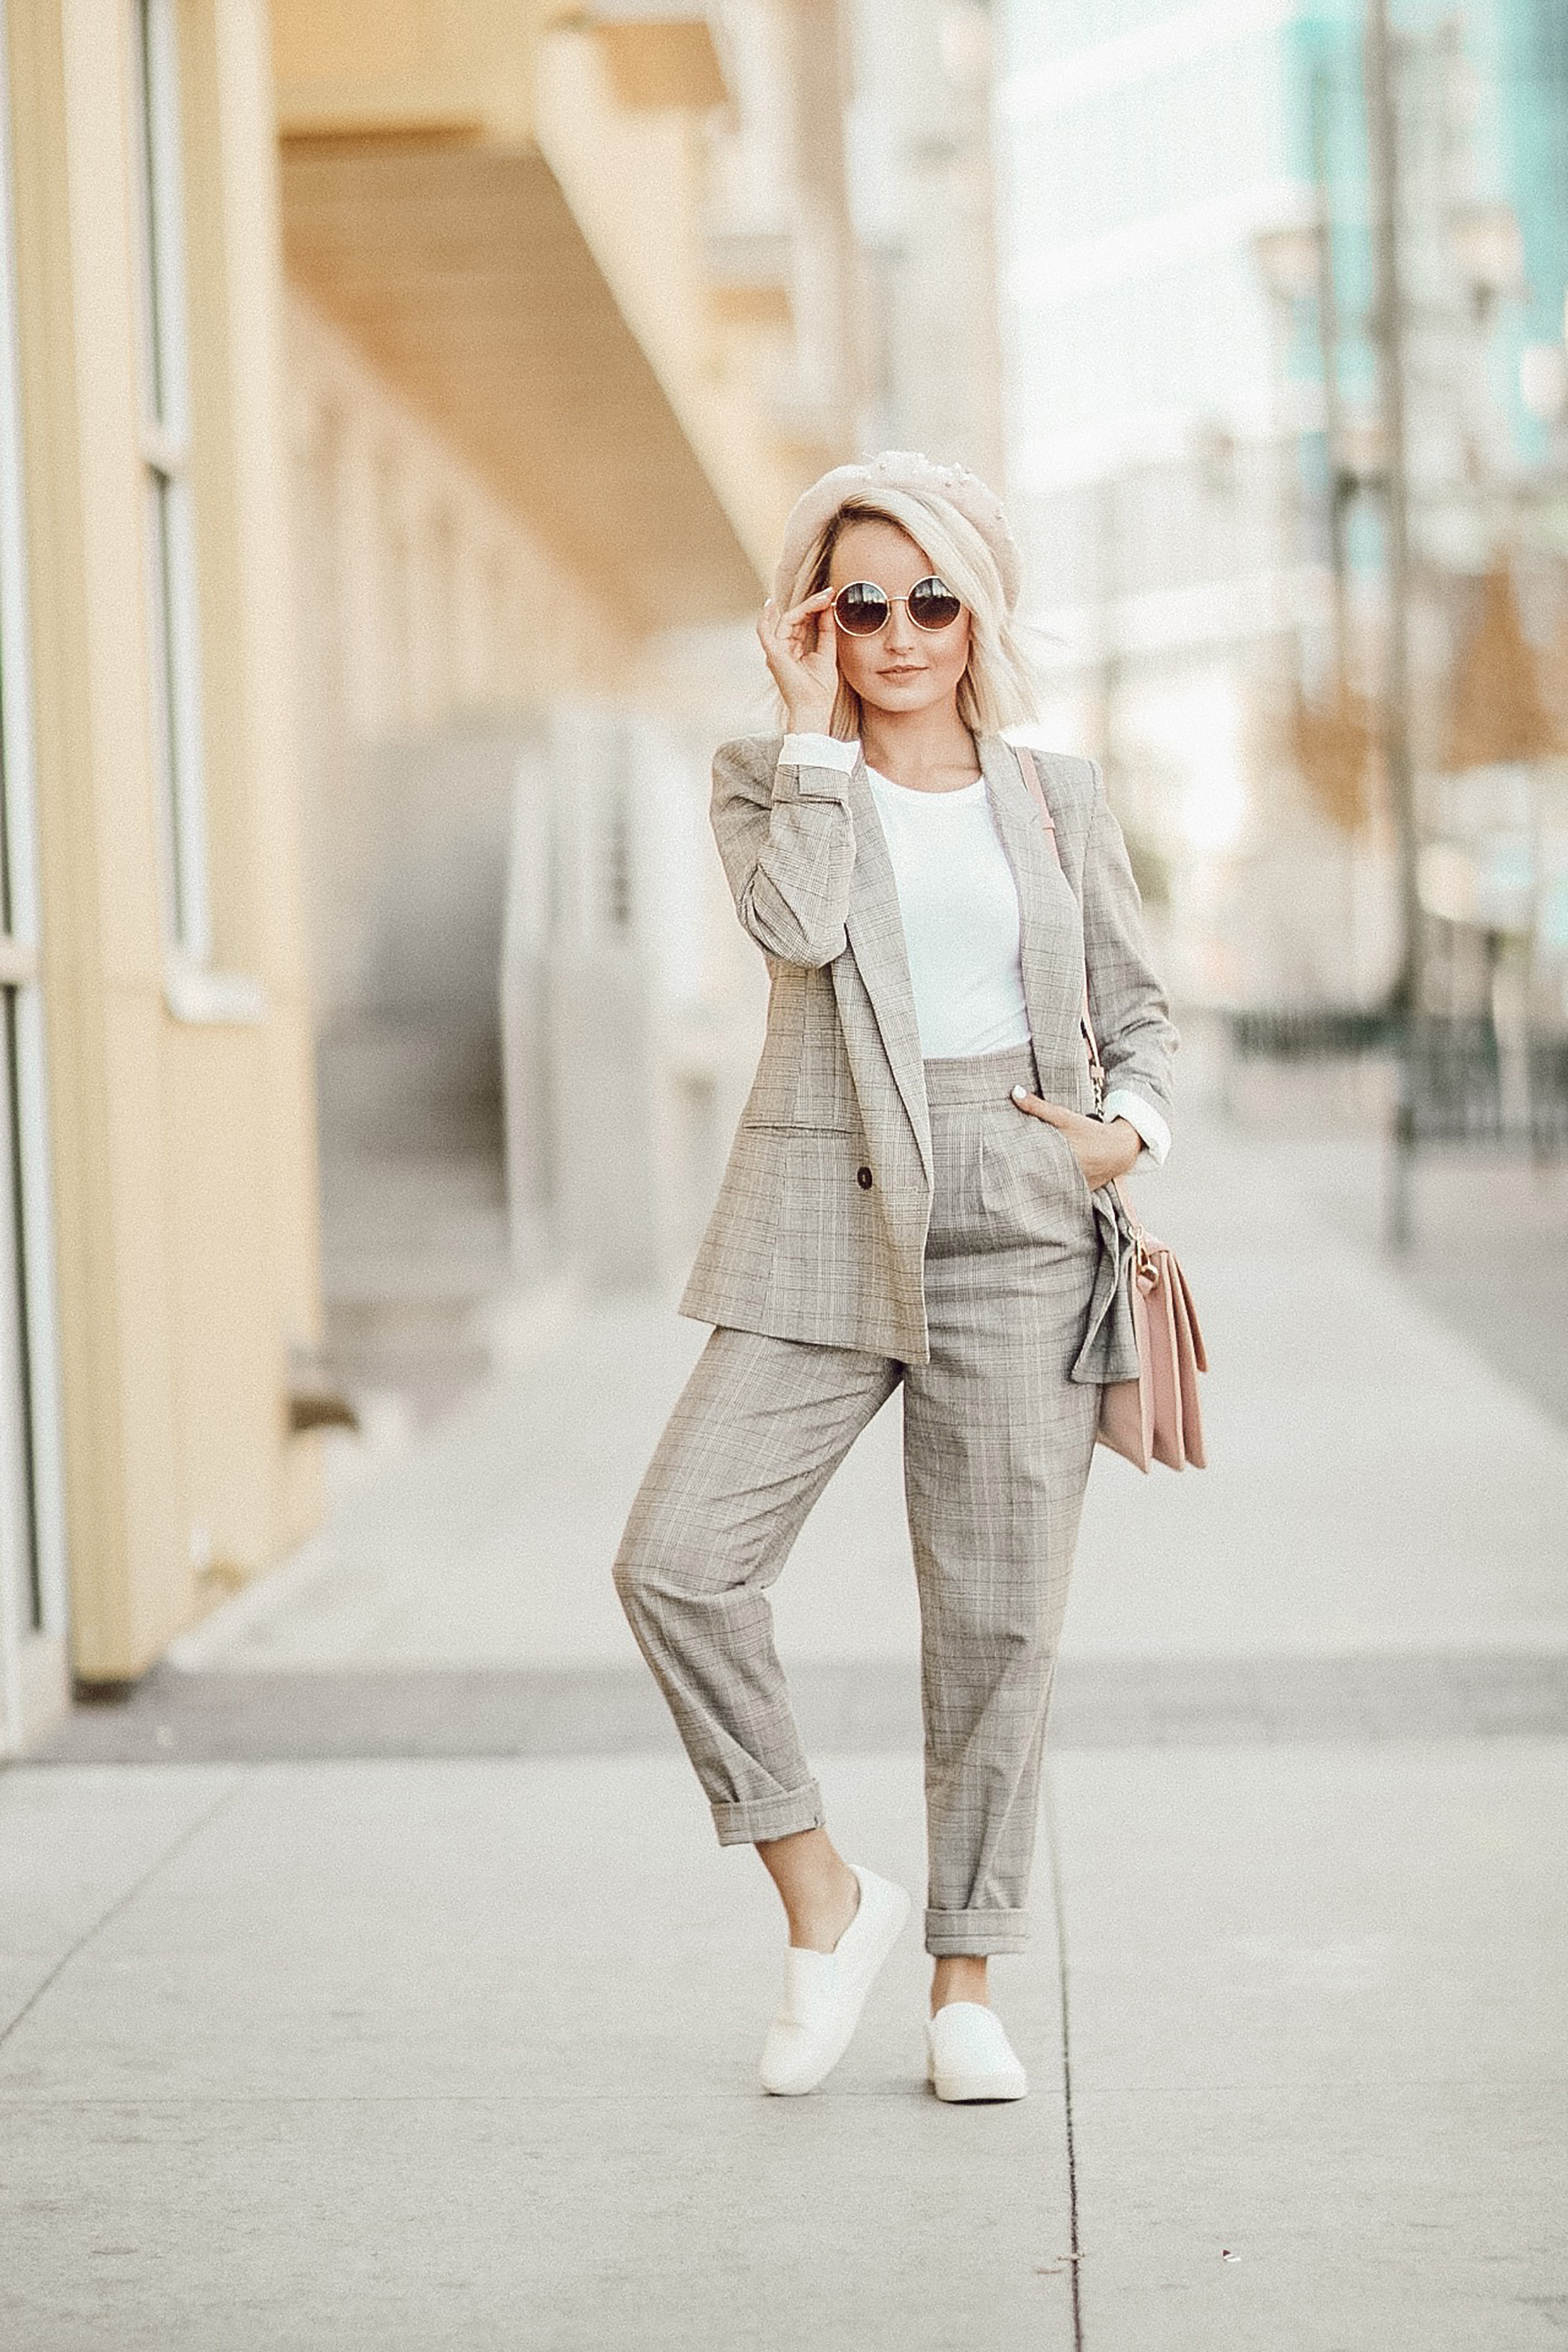 Alena Gidenko of modaprints.com shares tips on how to style down a suit for women